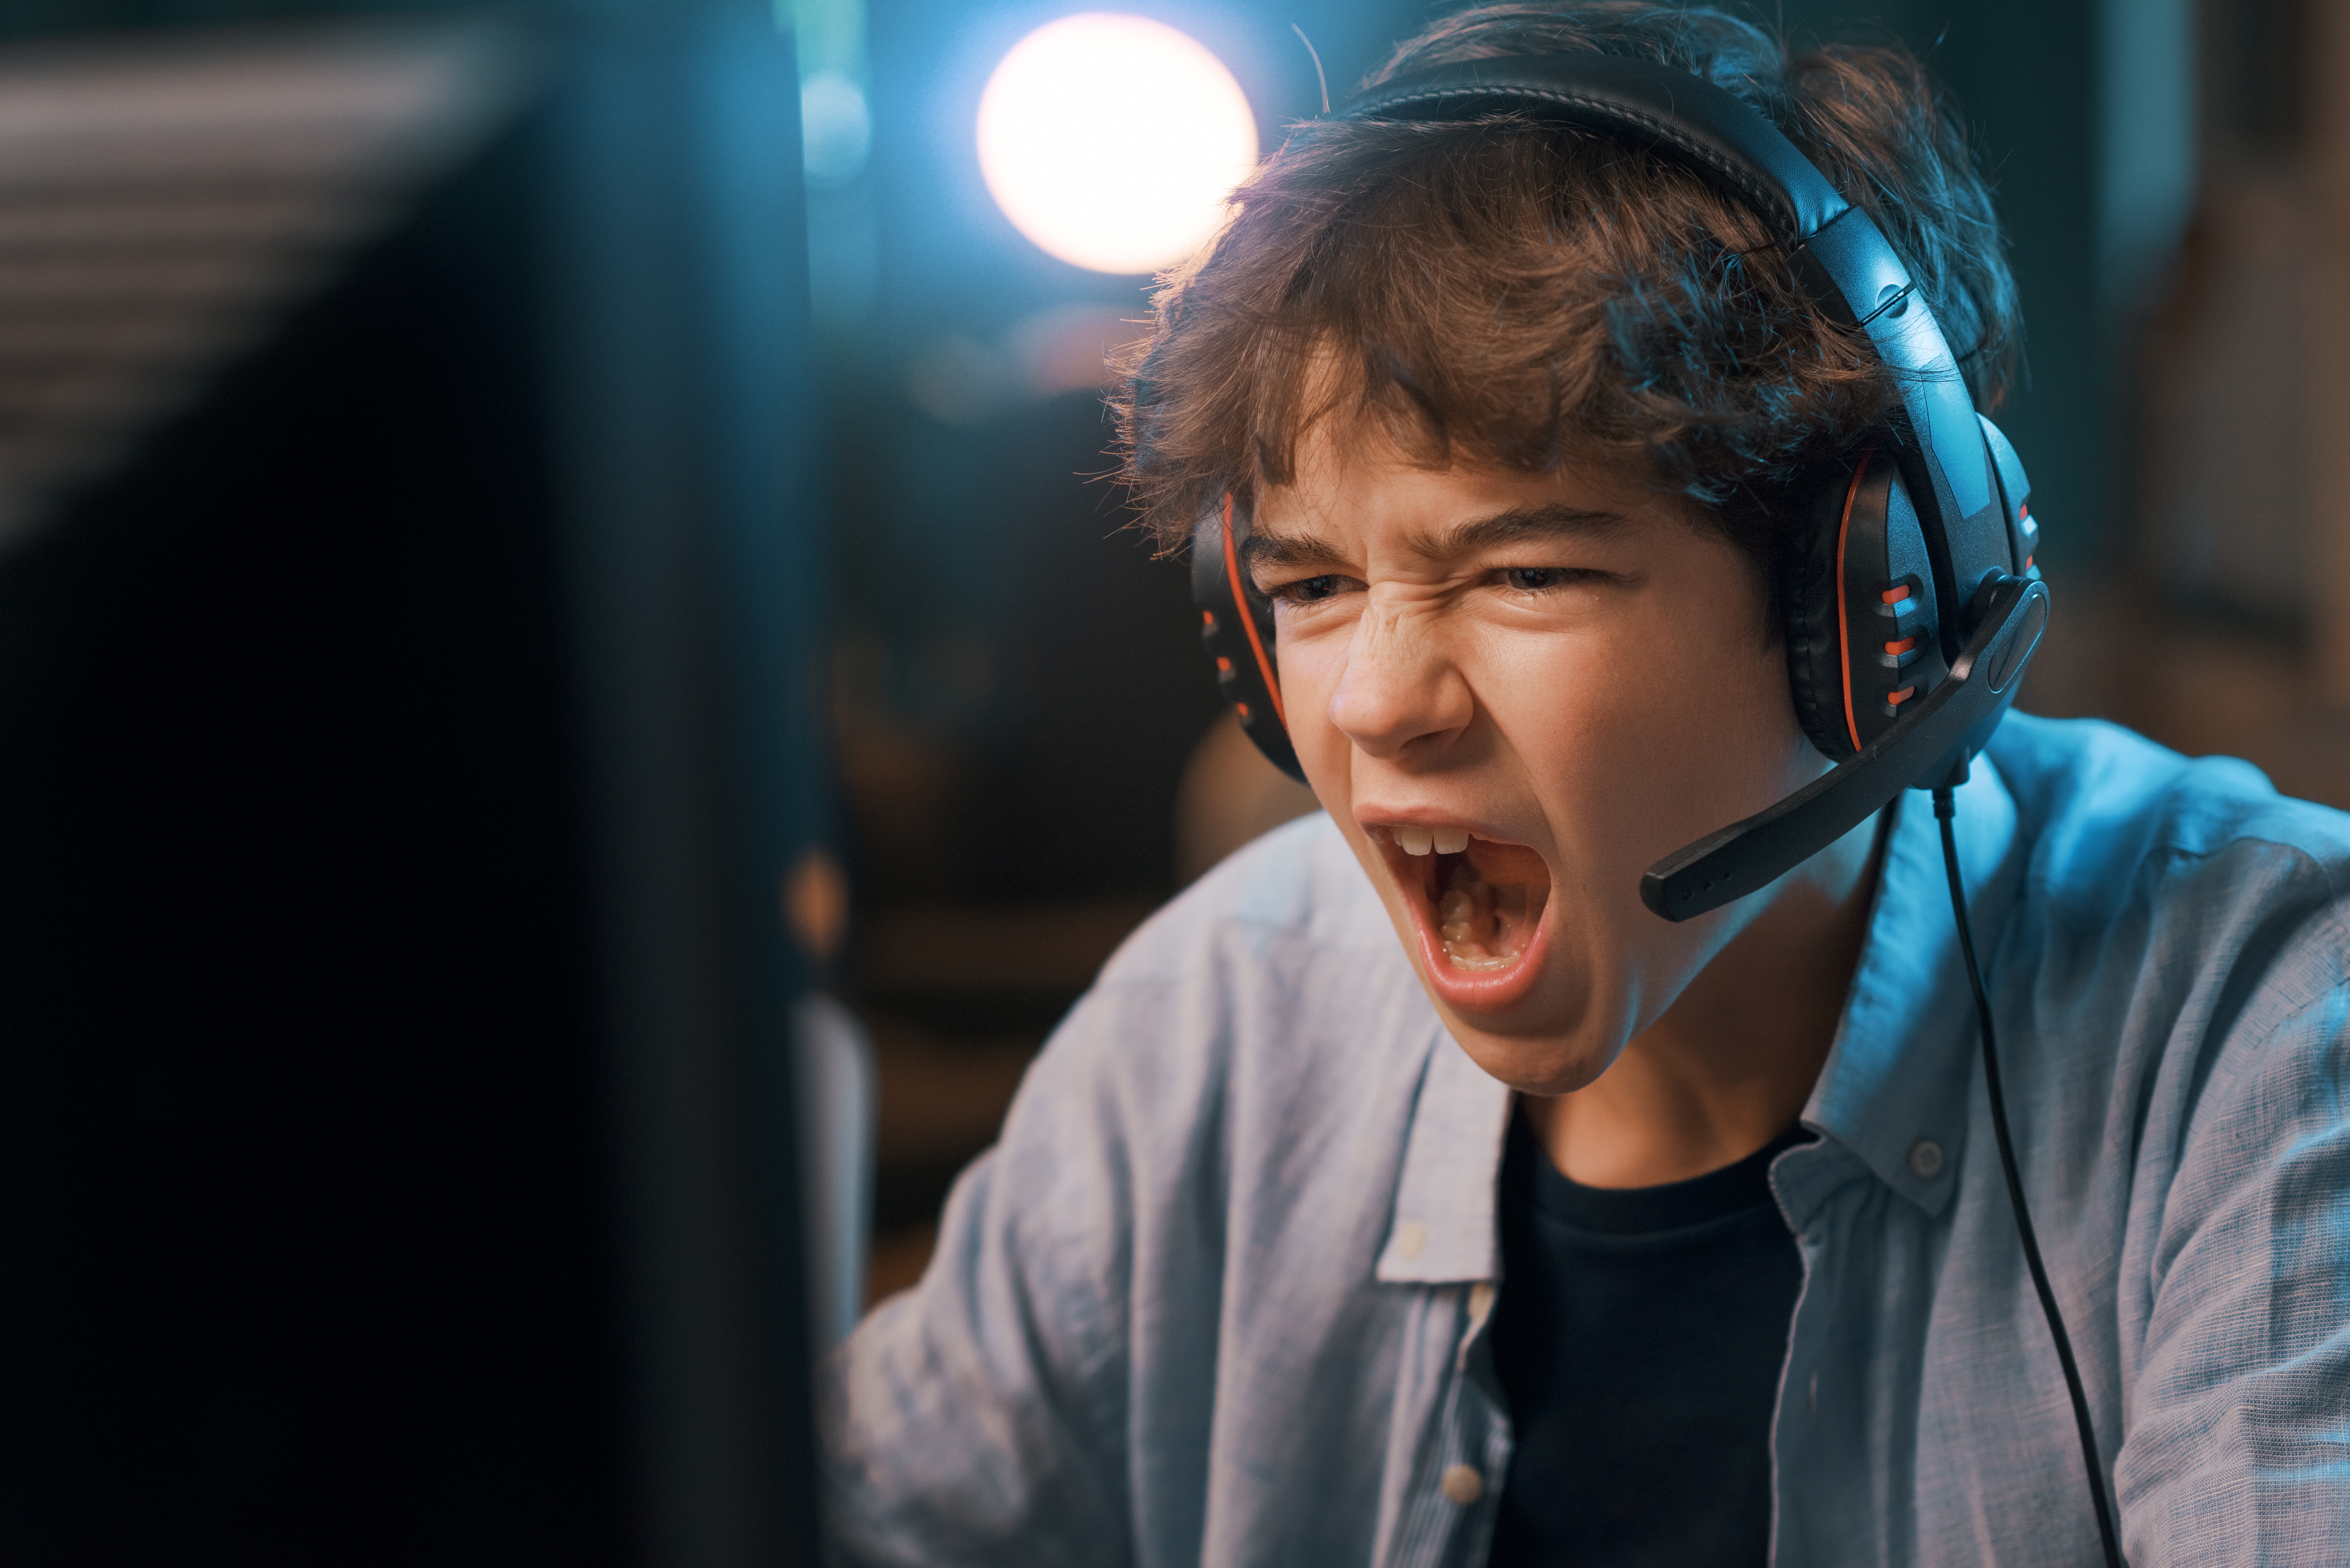 A boy playing a video game | Source: Shutterstock